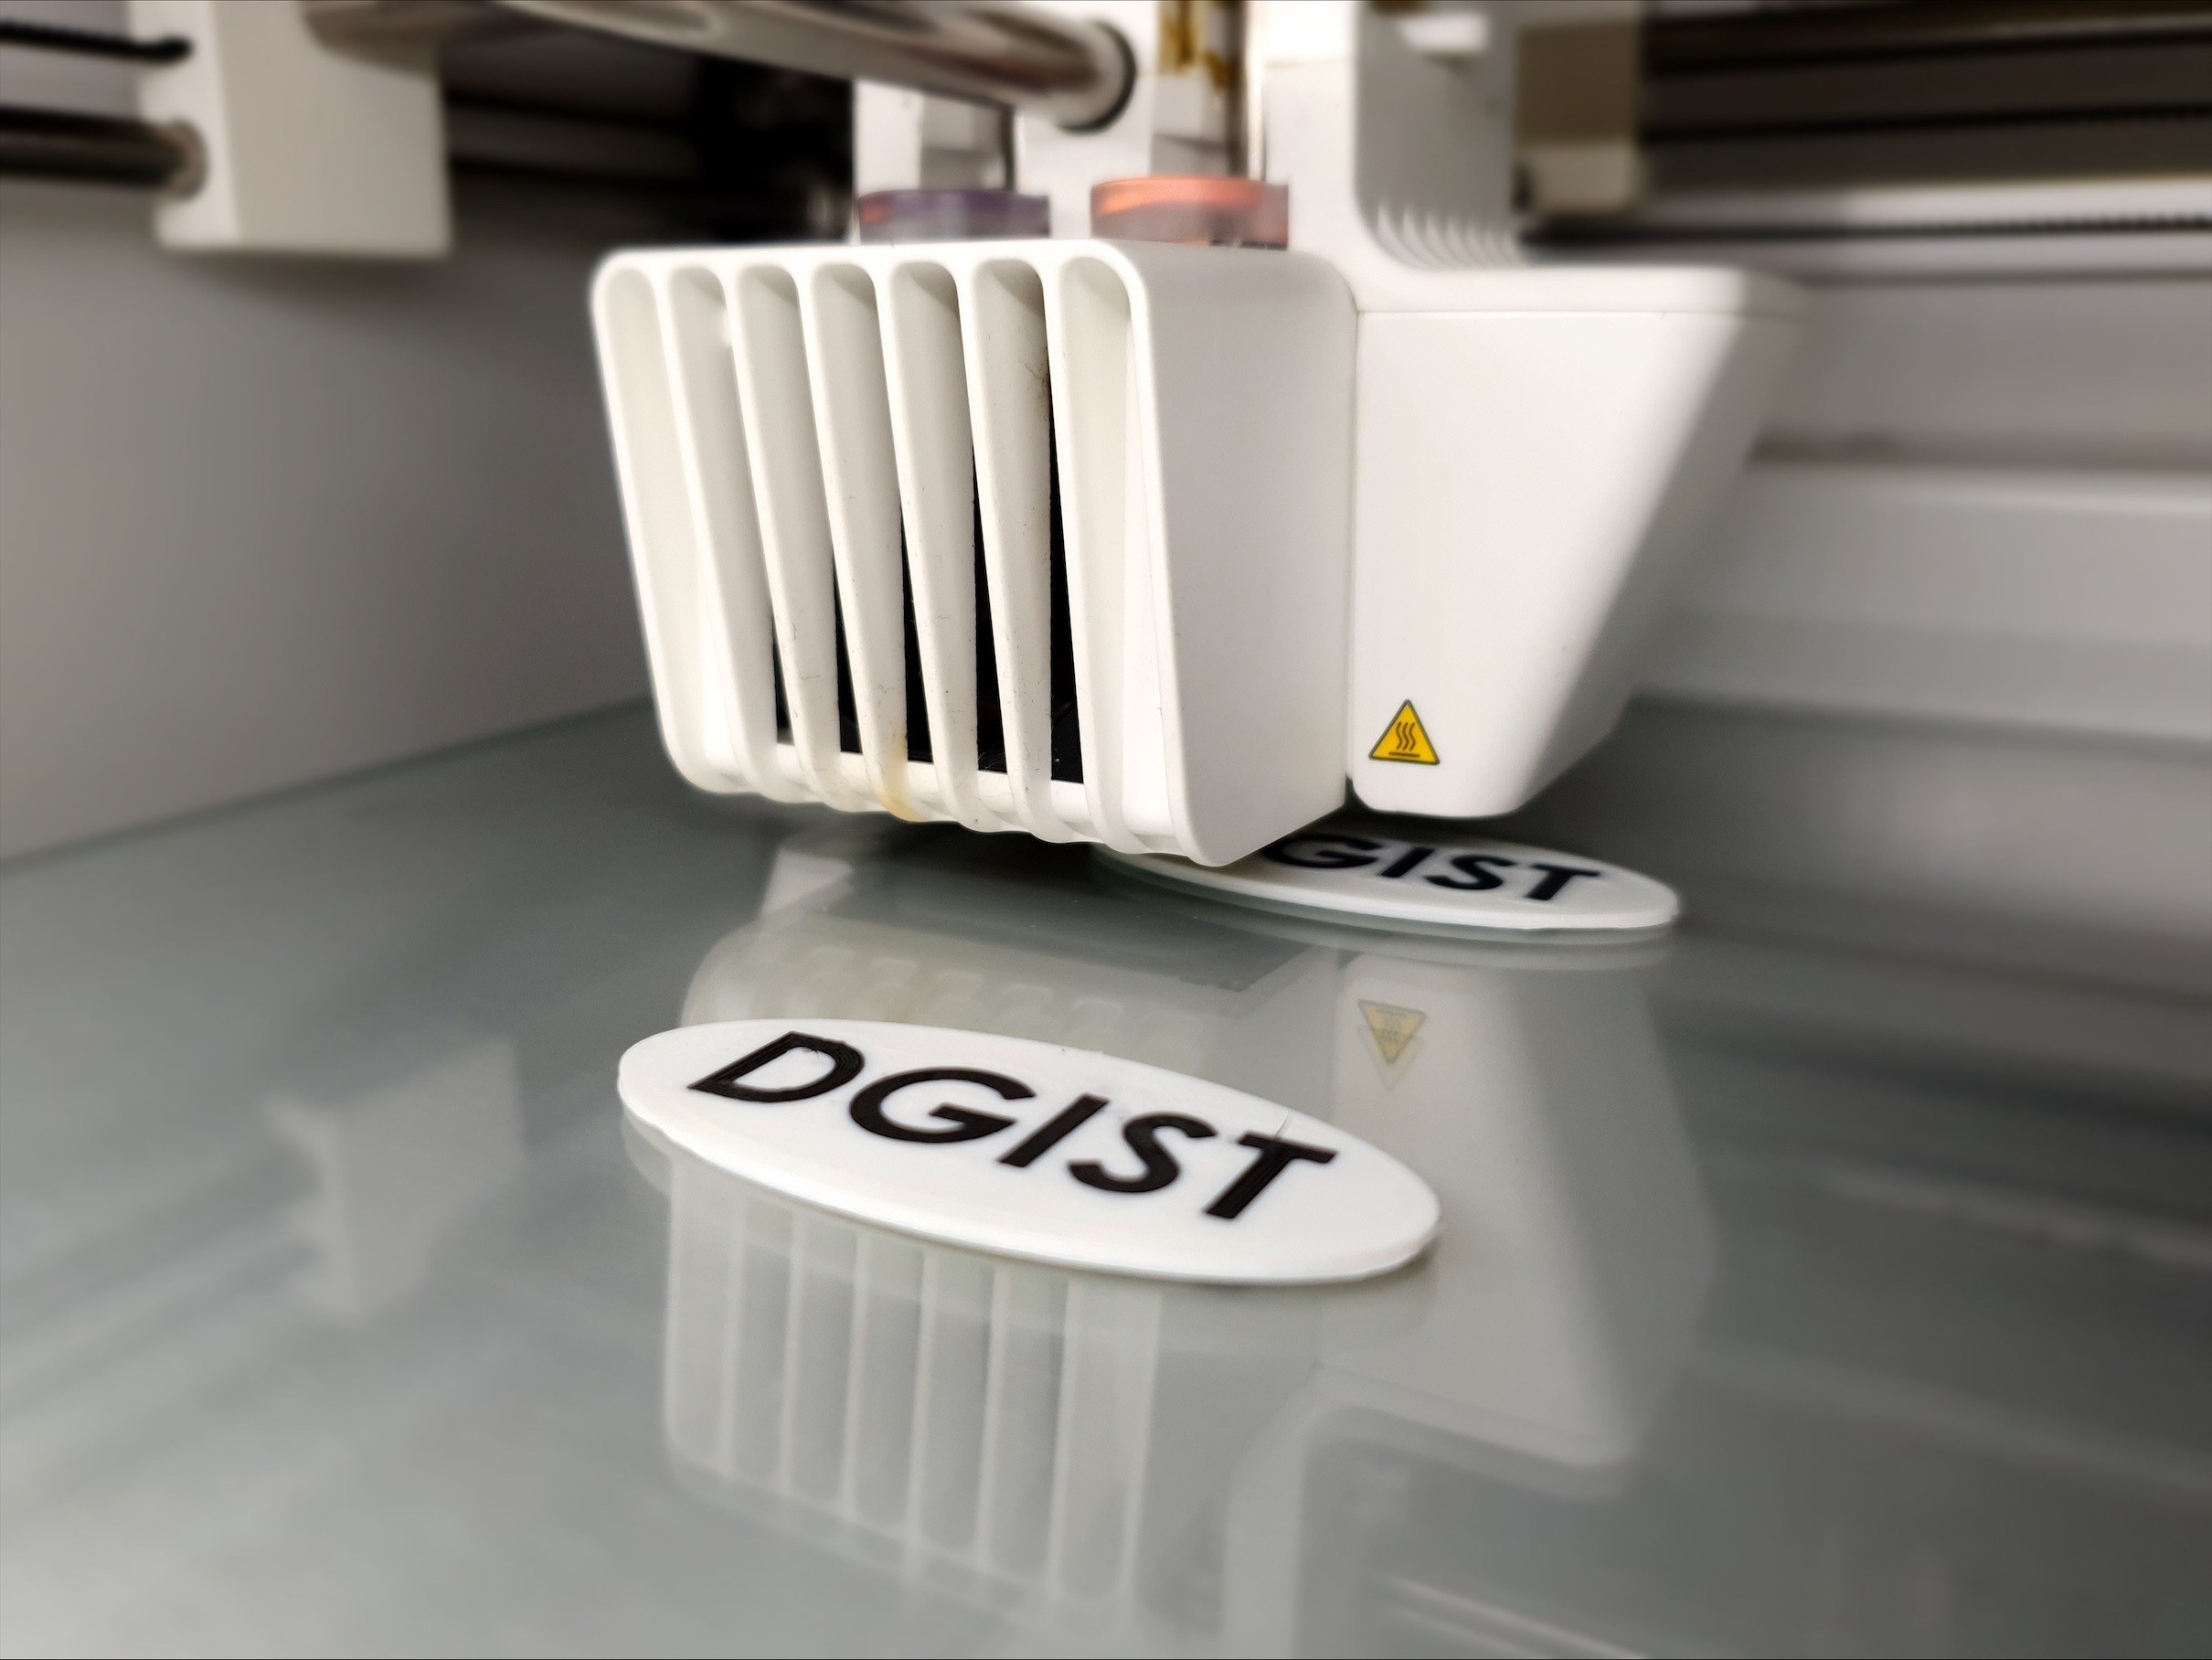 dgistscientists have developed a novel, multi-directional pressure sensor using 3D printing technology that is low-cost and scalable to large-scale production of smart robotic systems. Photo via DGIST.